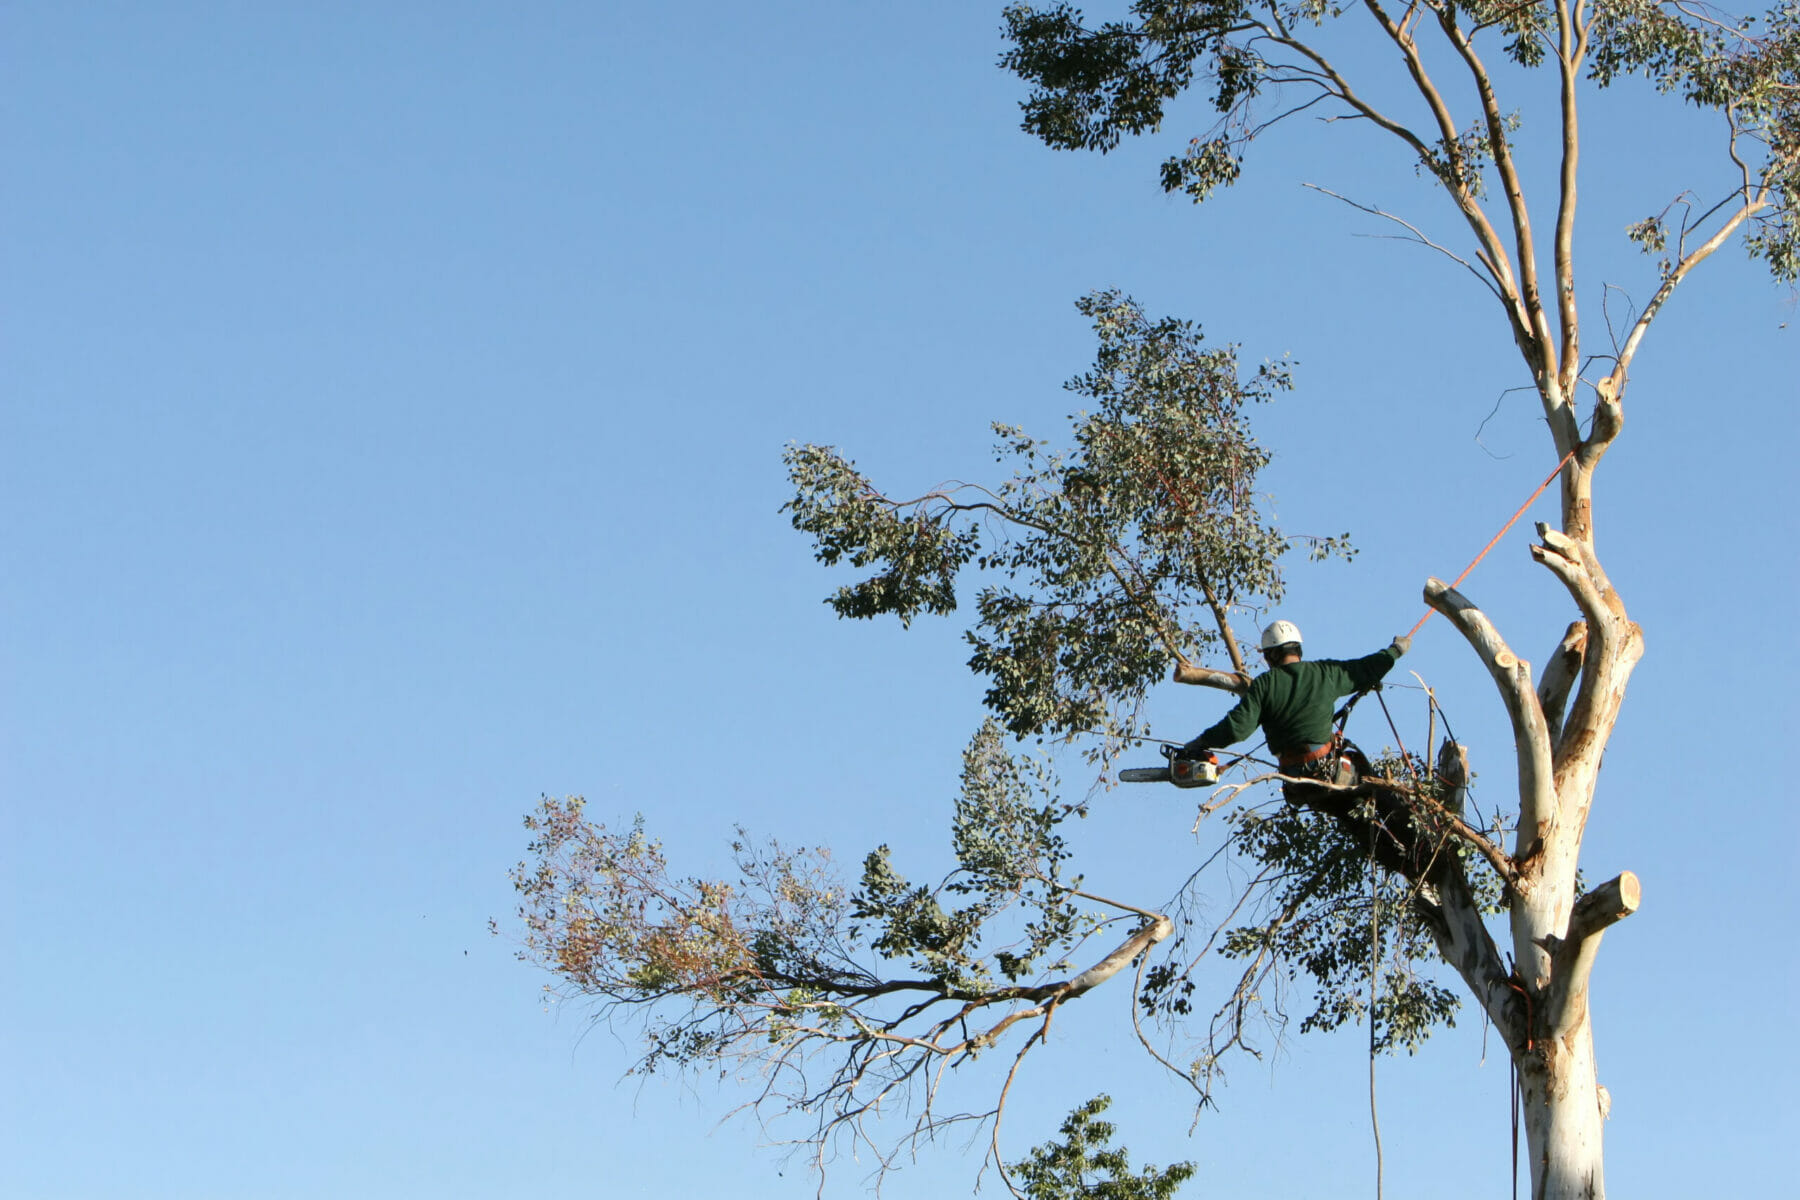 A large tree is being trimmed by a man suspended ropes.